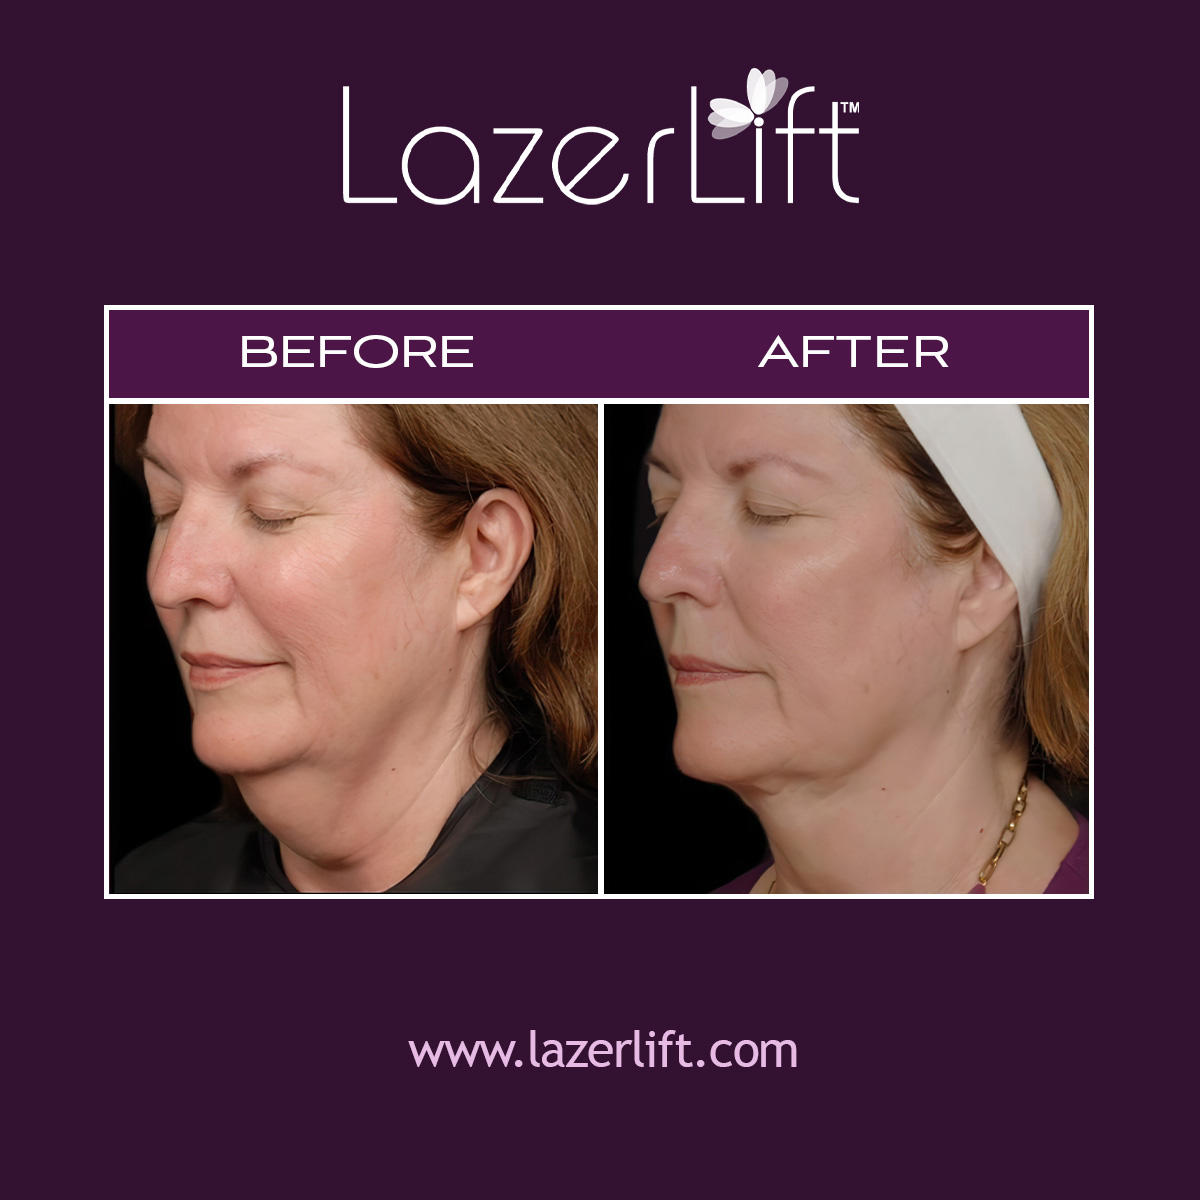 Neck lift in Orlando uses innovative LazerLift® technology to treat skin that has lost its elasticity as an effect of aging. LazerLift® heats the lower layers of the skin, melting away excess fat and promoting collagen production to smooth neck bands, tighten sagging skin, address the dreaded “turkey neck,” and restore jawline contours. LazerLift® laser neck lift is minimally invasive and requires little-to-no downtime.